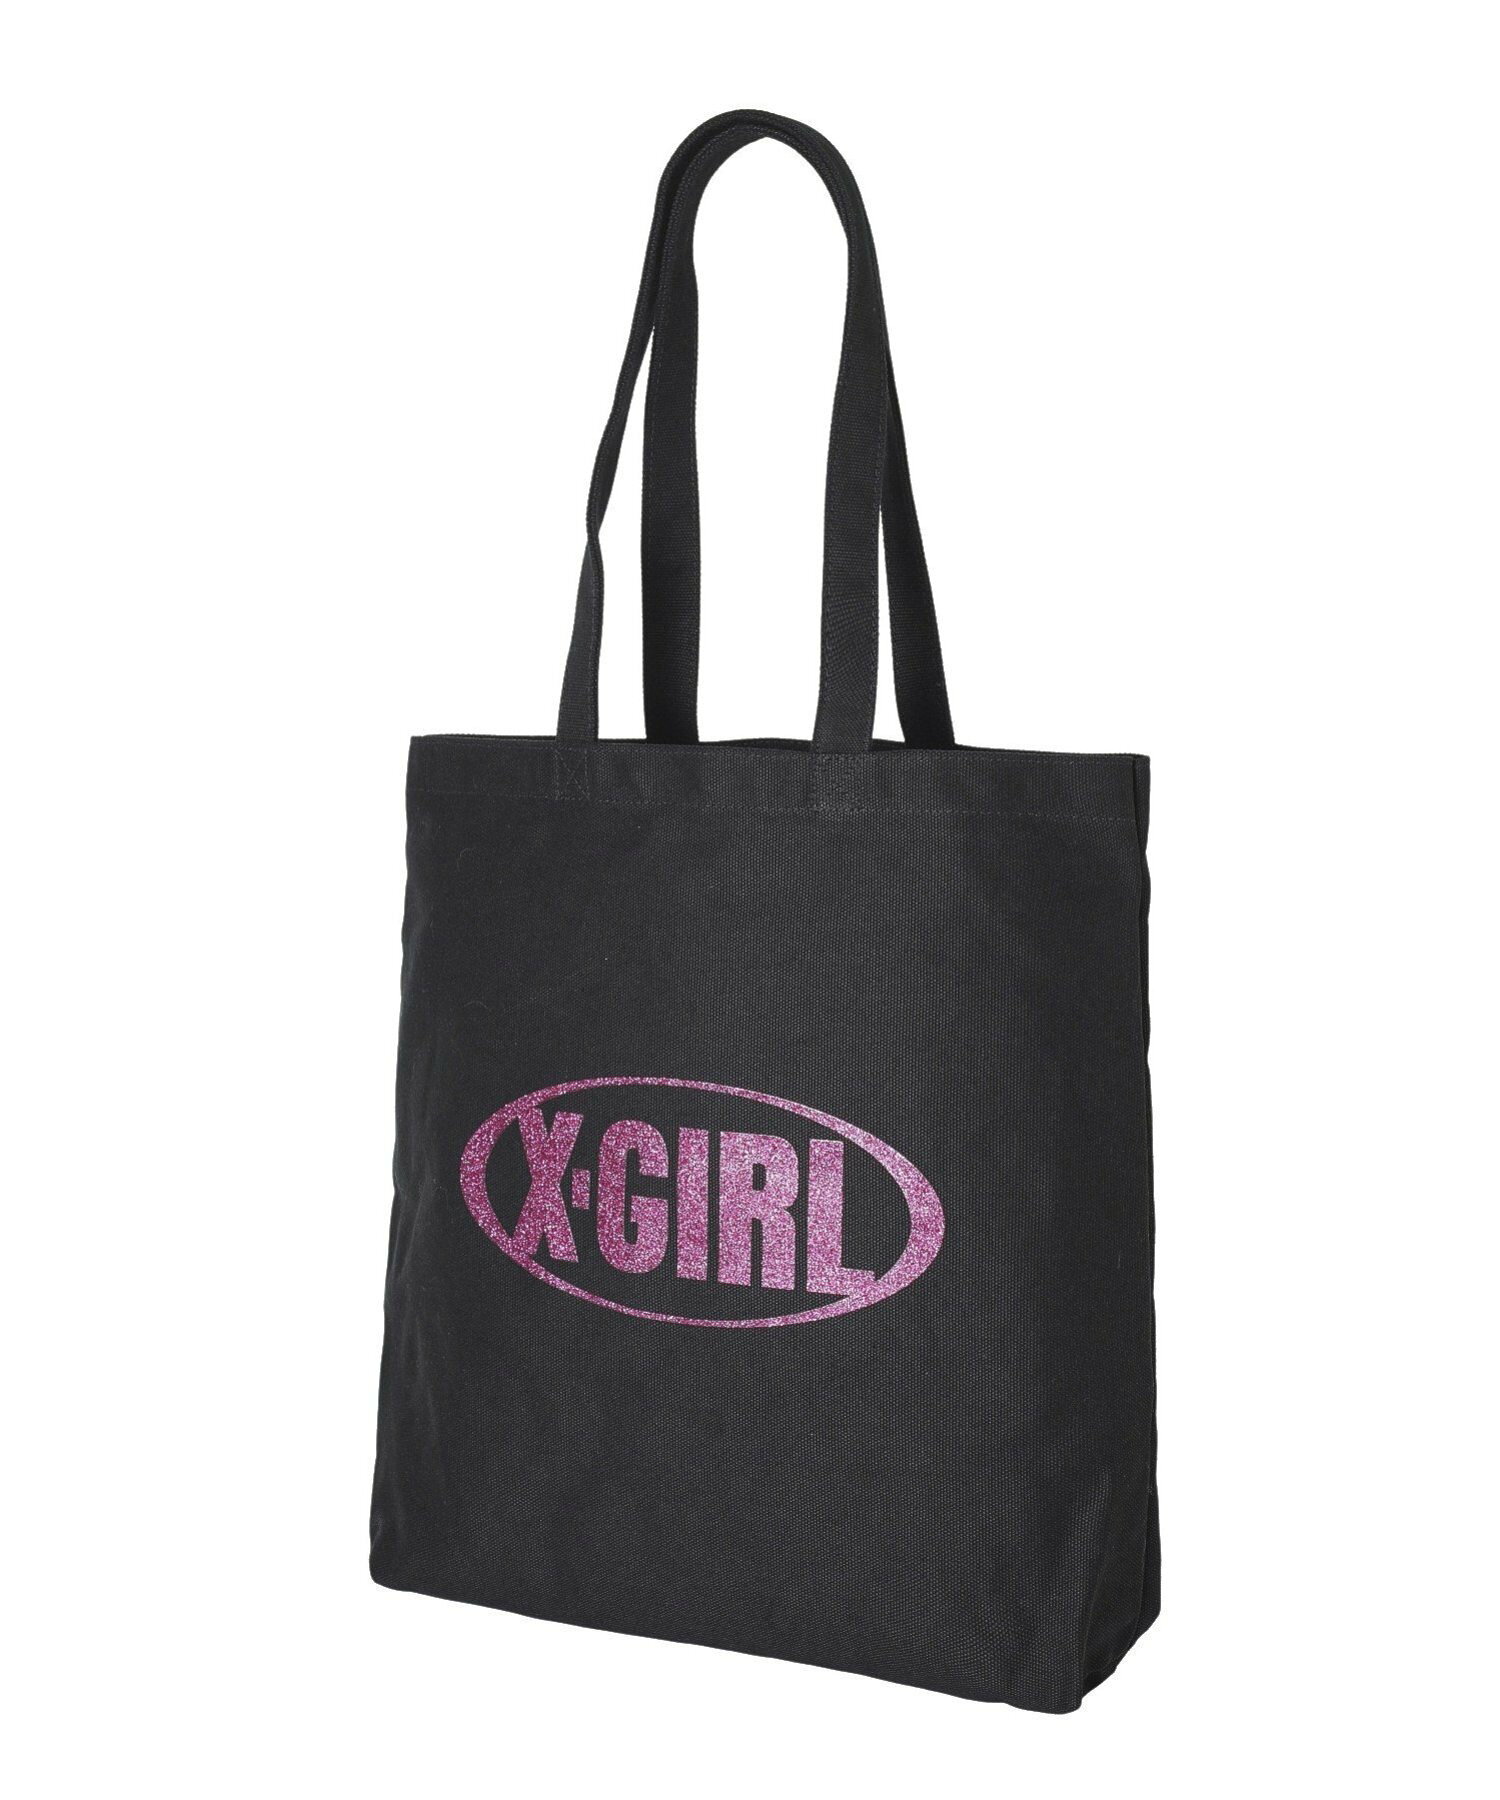 GLITTER OVAL LOGO CANVAS TOTE BAG トートバッグ X-girl